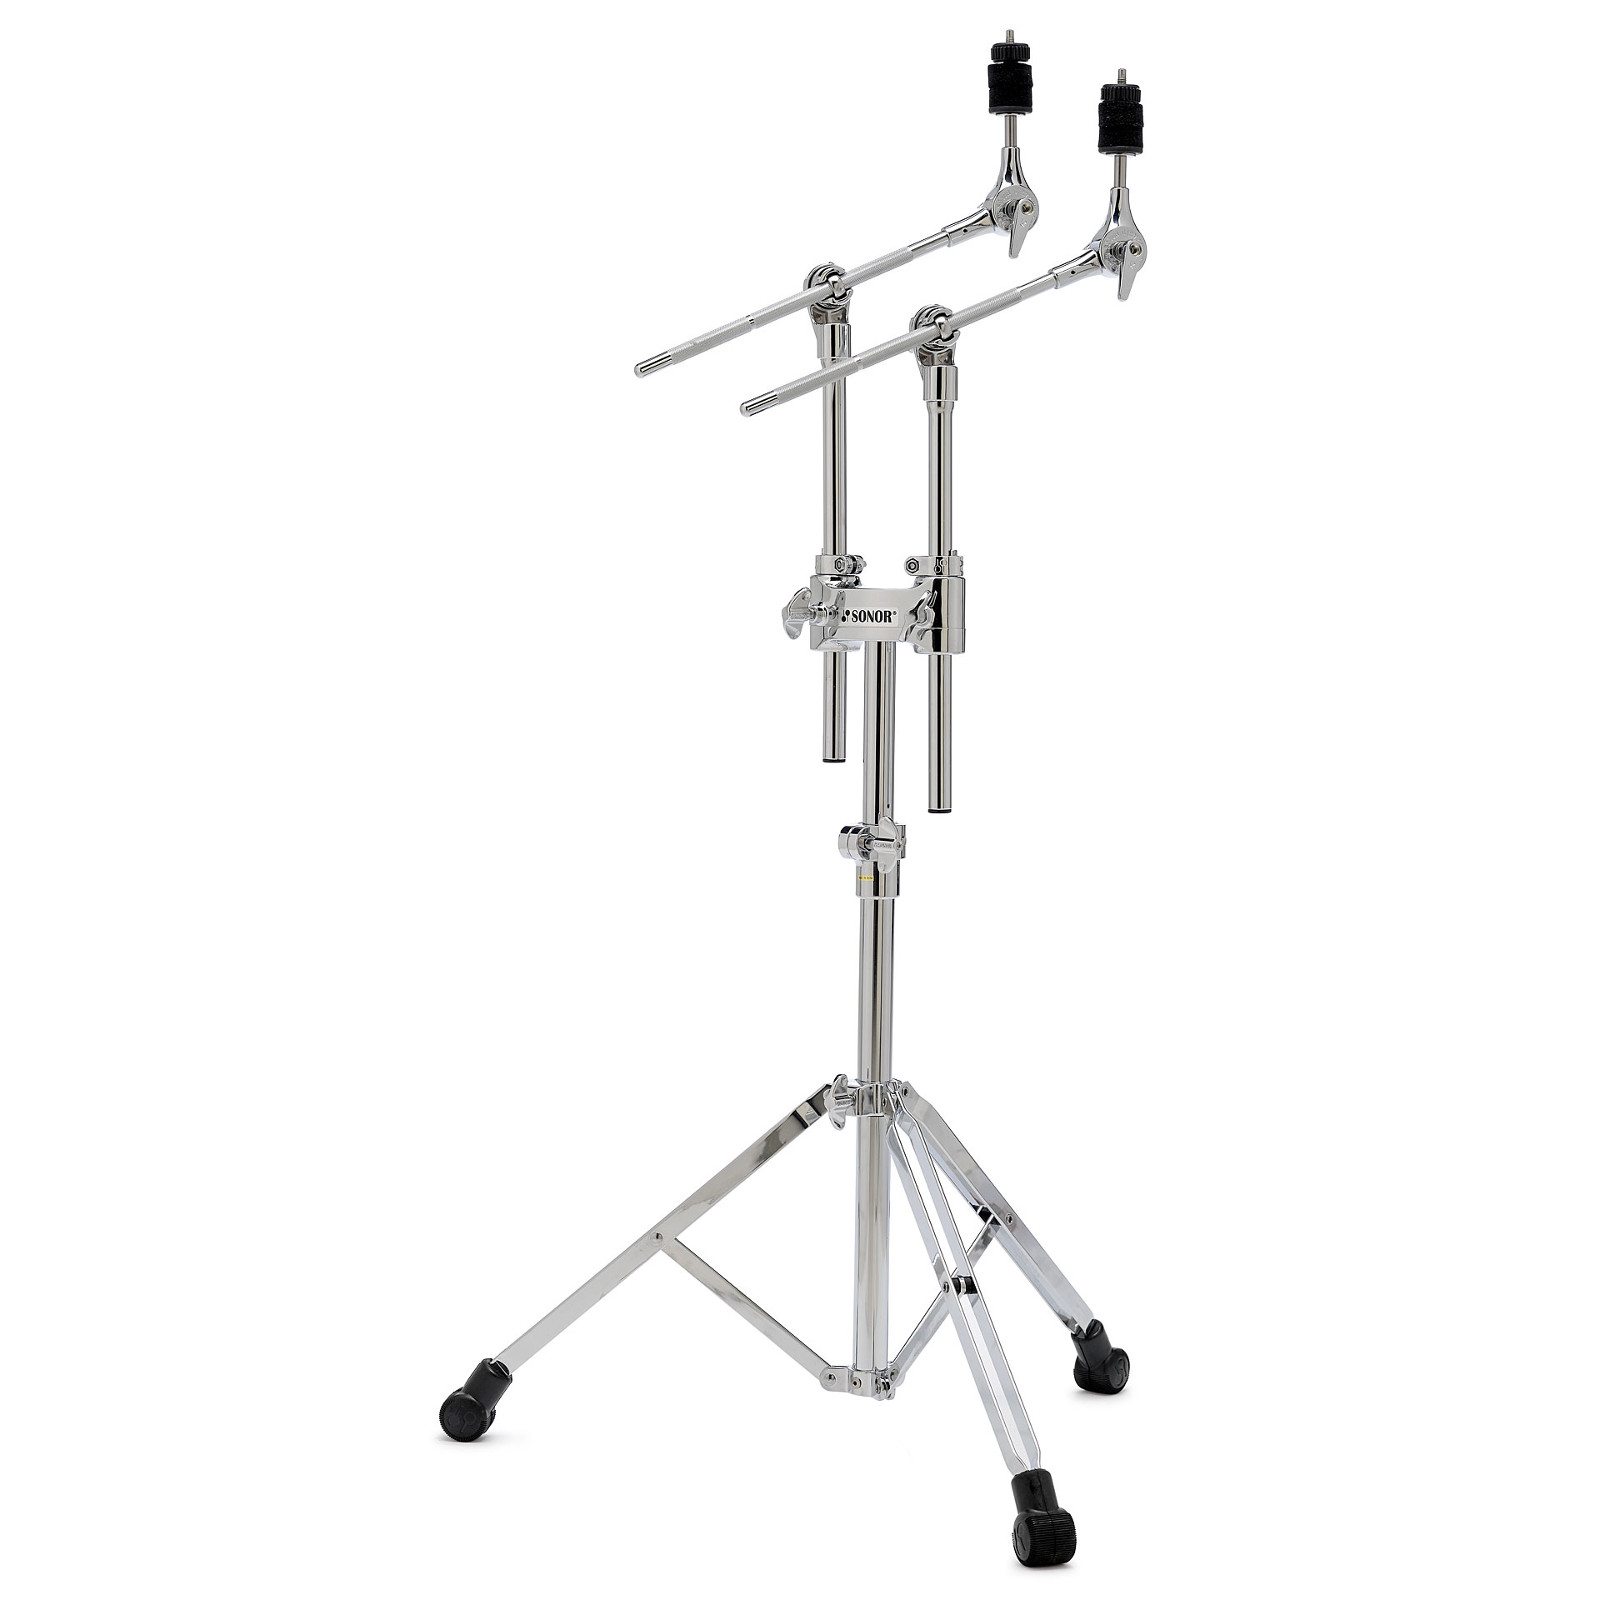 SONOR DCS 4000 - DOUBLE CYMBALS STAND